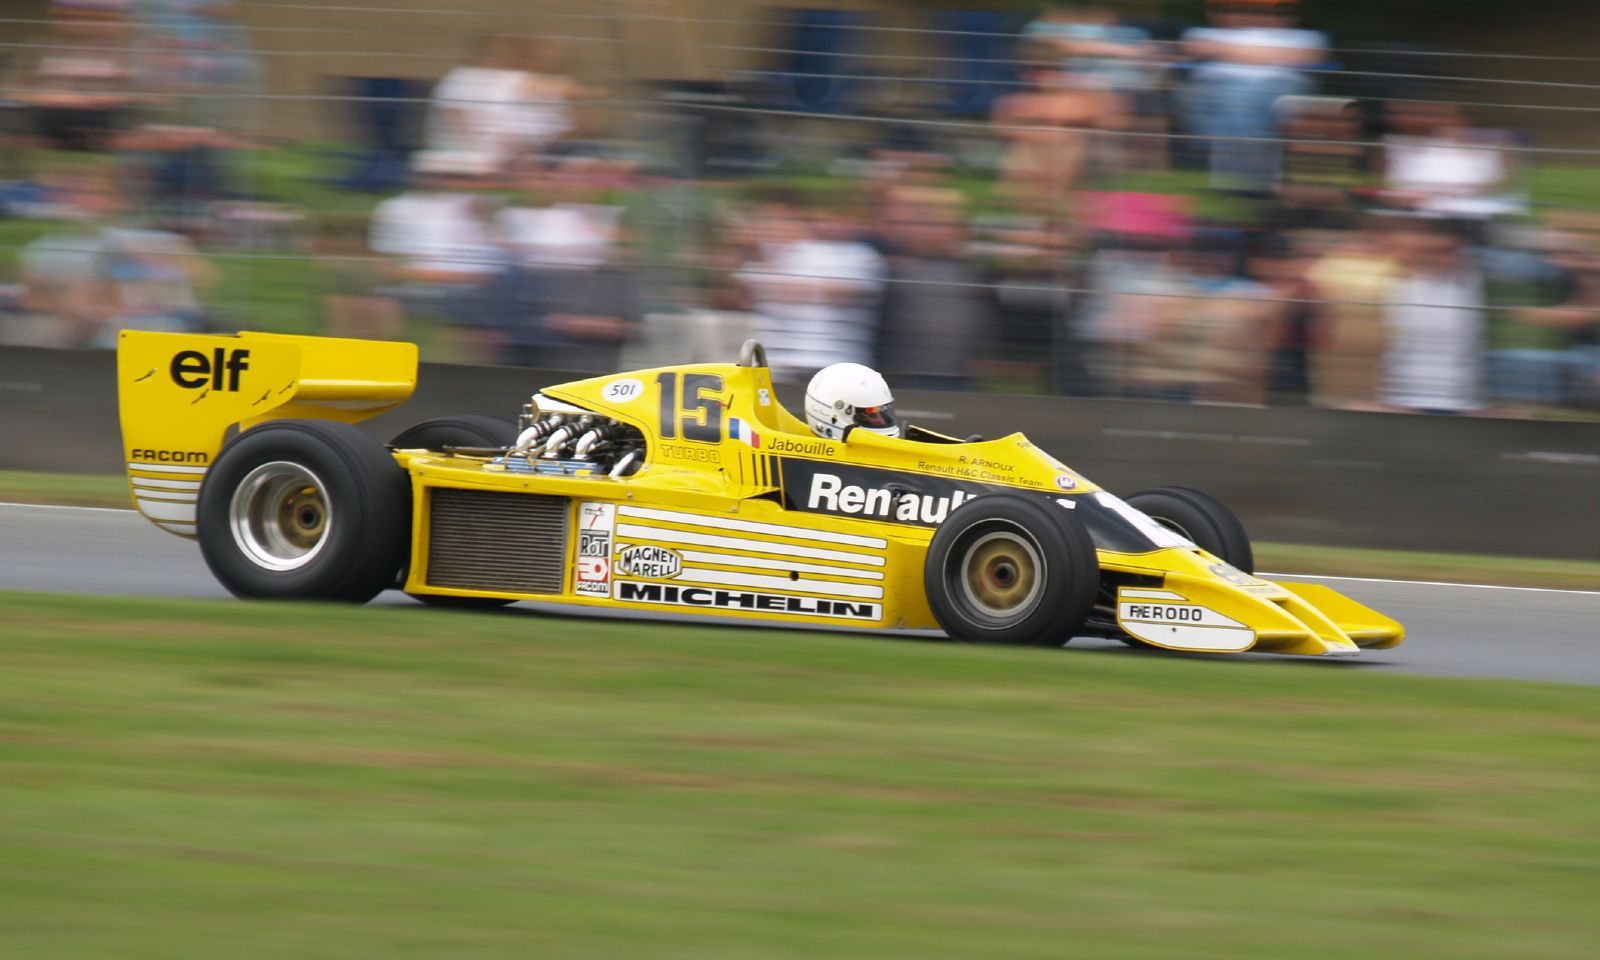 Renault's first F1 entry was in 1977.